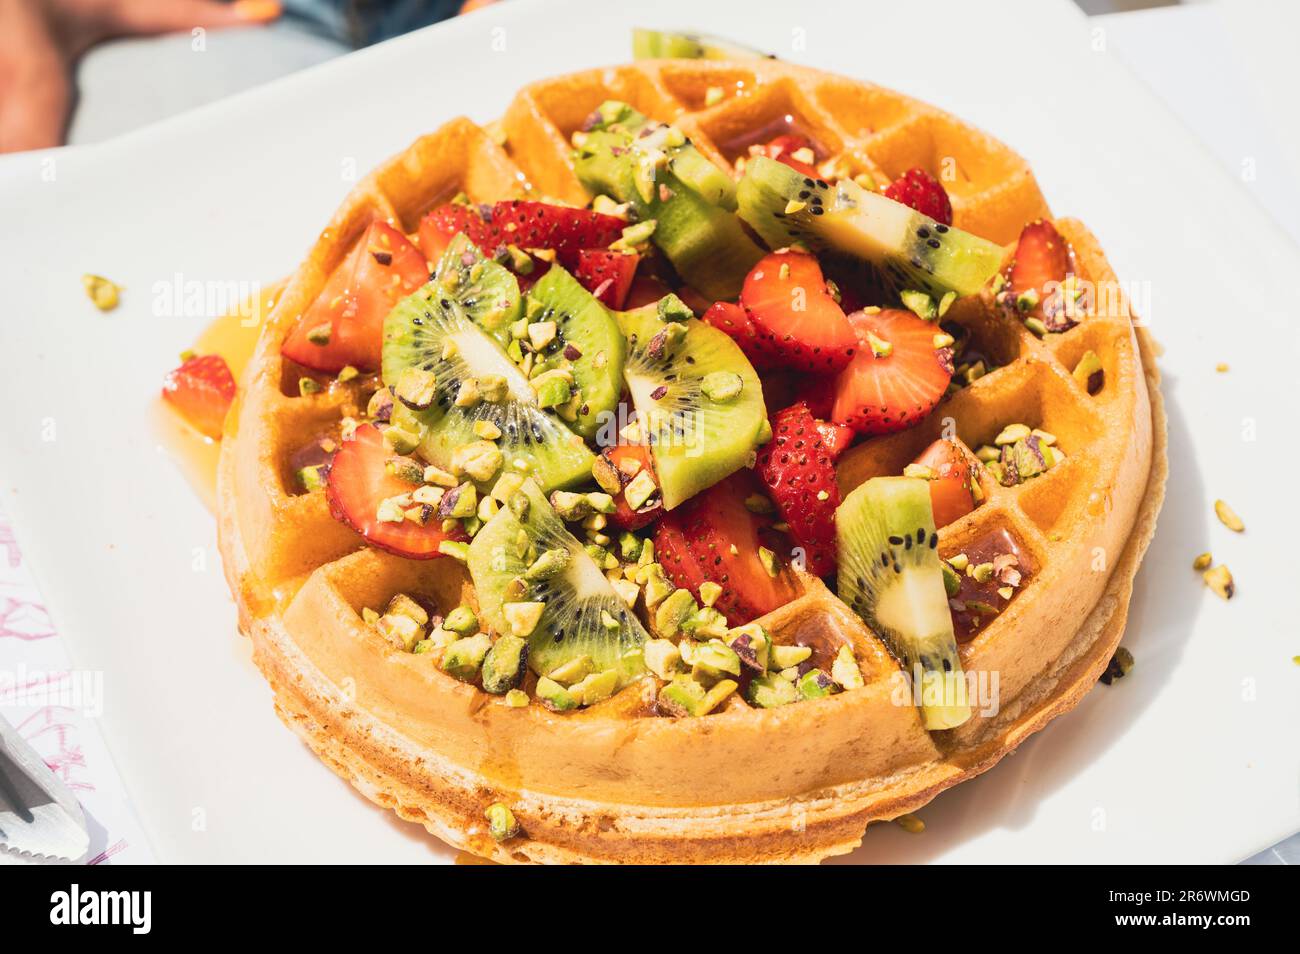 Large waffle with fresh strawberries, kiwi slices, pistachio pieces and honey on white plate Stock Photo